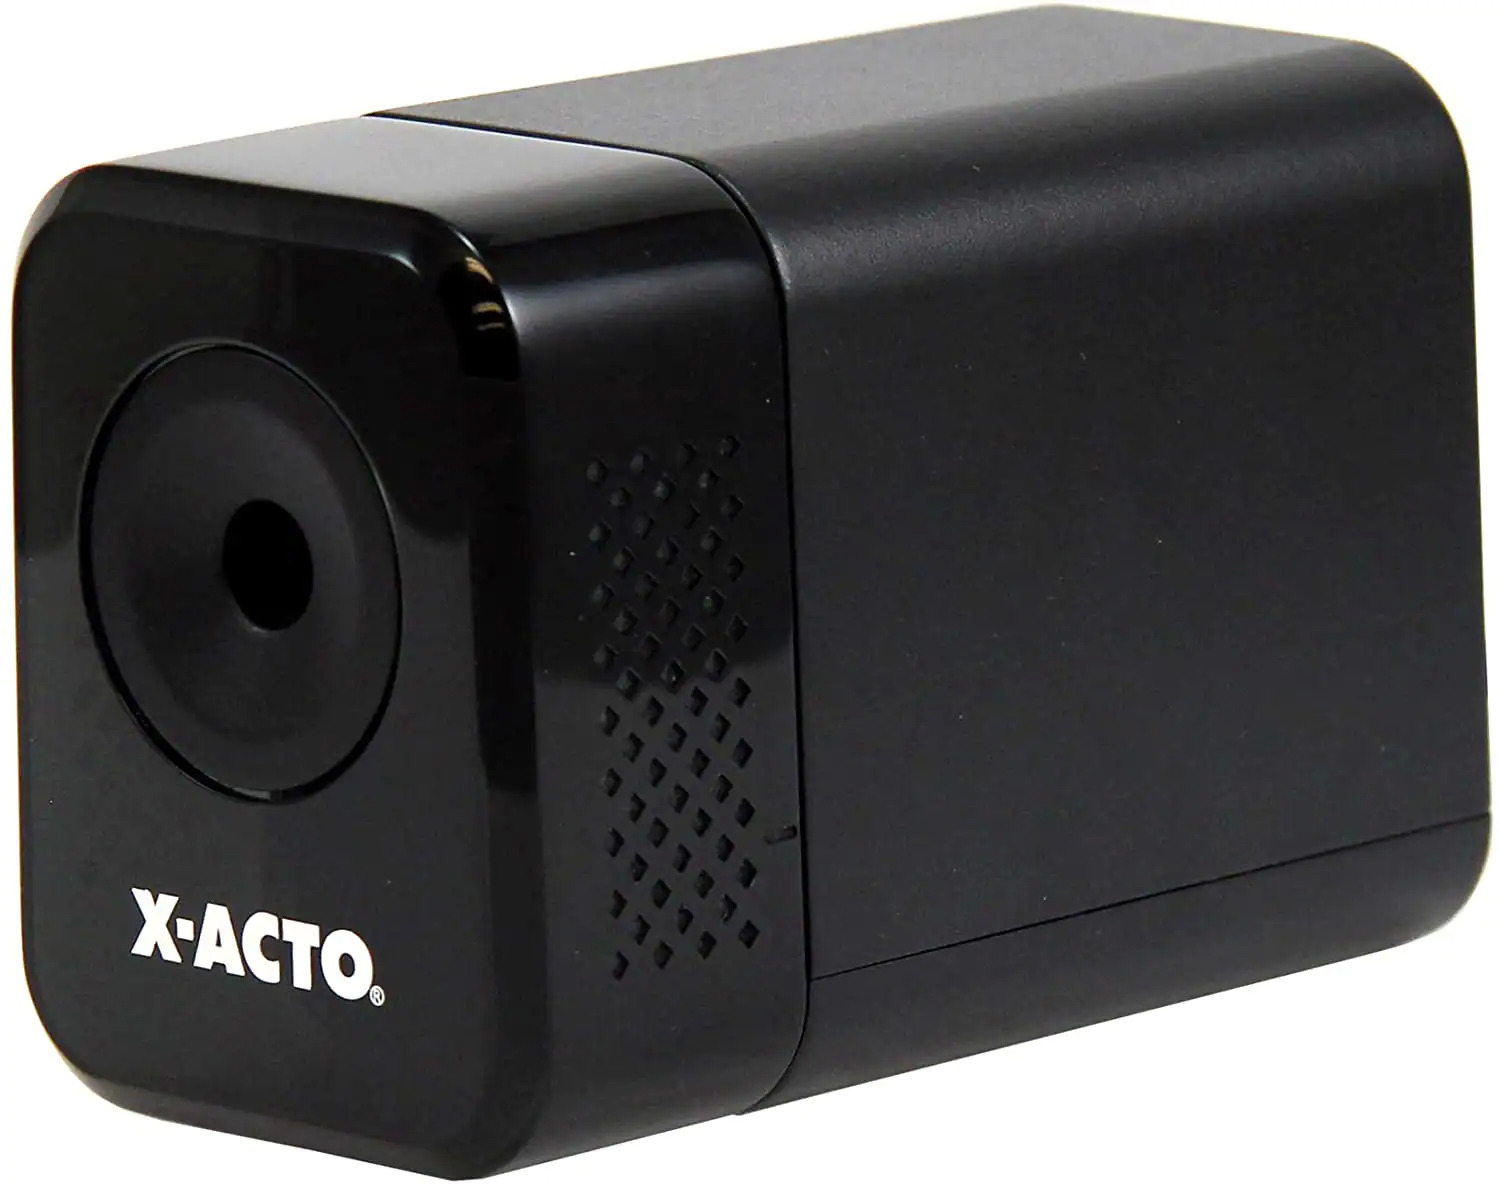 X-ACTO Electric Pencil Sharpener | XLR Heavy Duty Electric Pencil Sharpener, Quiet Motor, Pencil Saver Technology, Auto-Reset and Safe Start - $14.99 @amazon